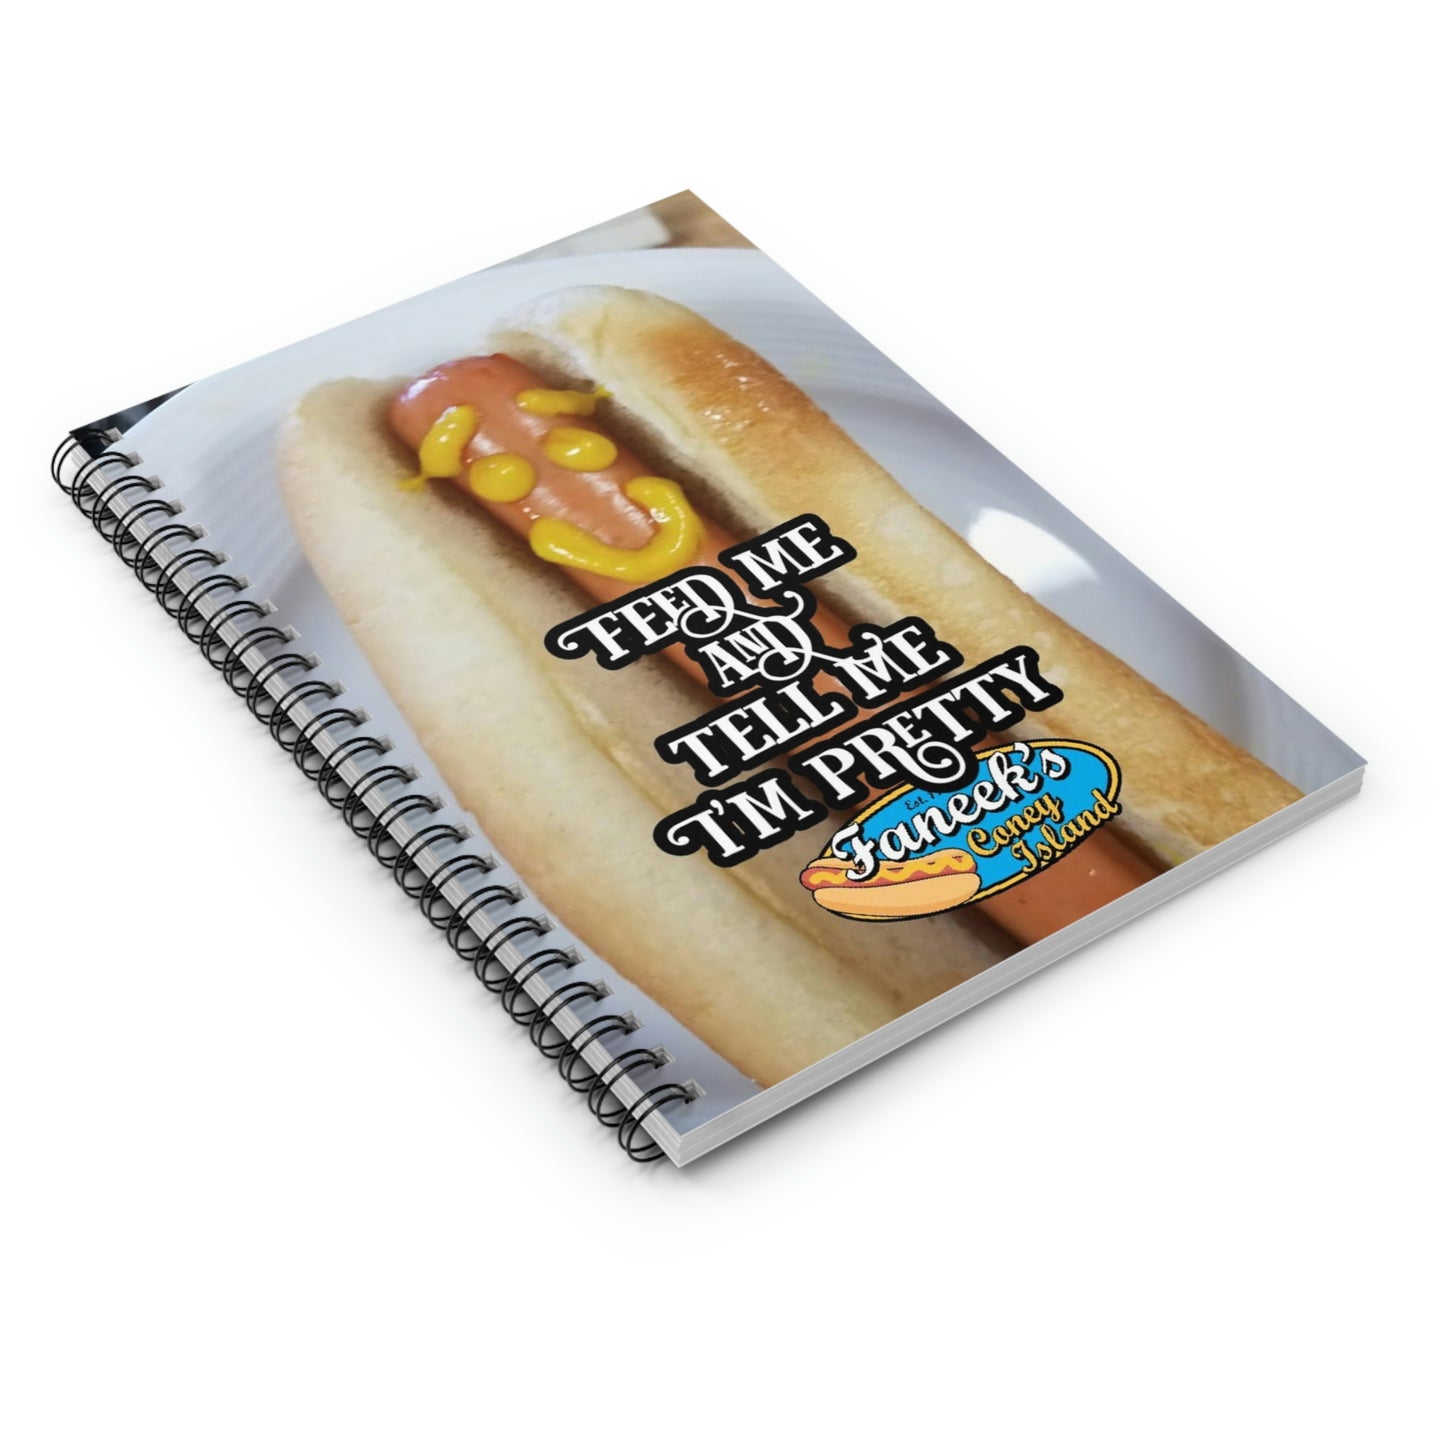 Feed Me & Tell ME I'm Pretty Spiral Notebook - Ruled Line